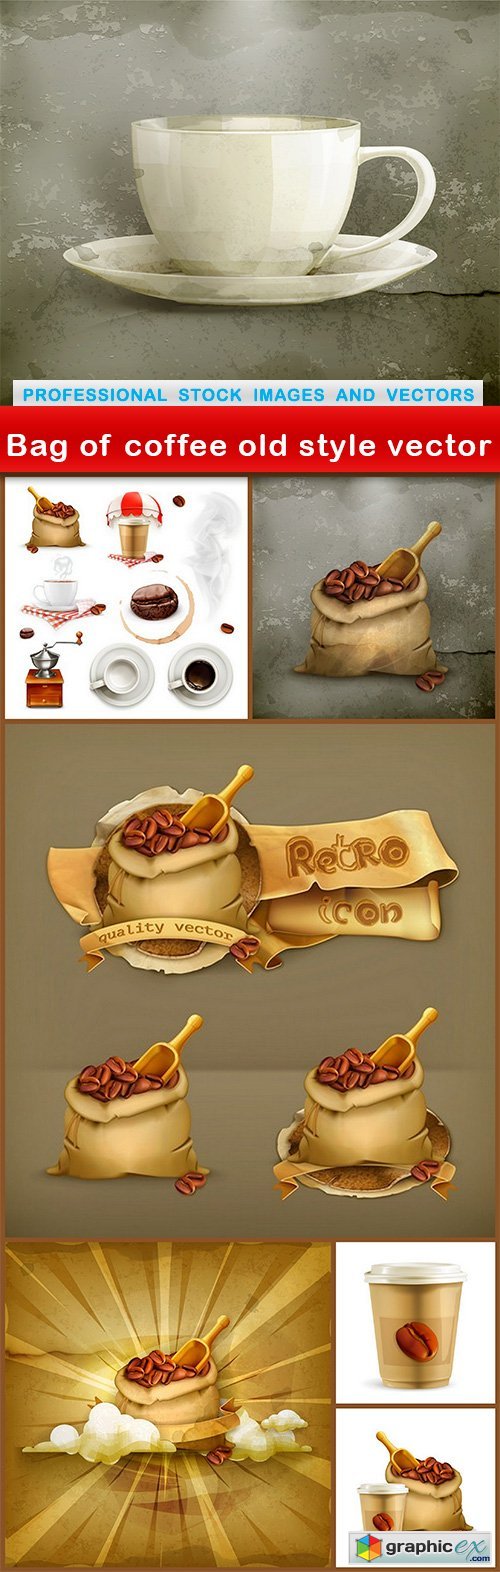 Bag of coffee old style vector - 7 EPS